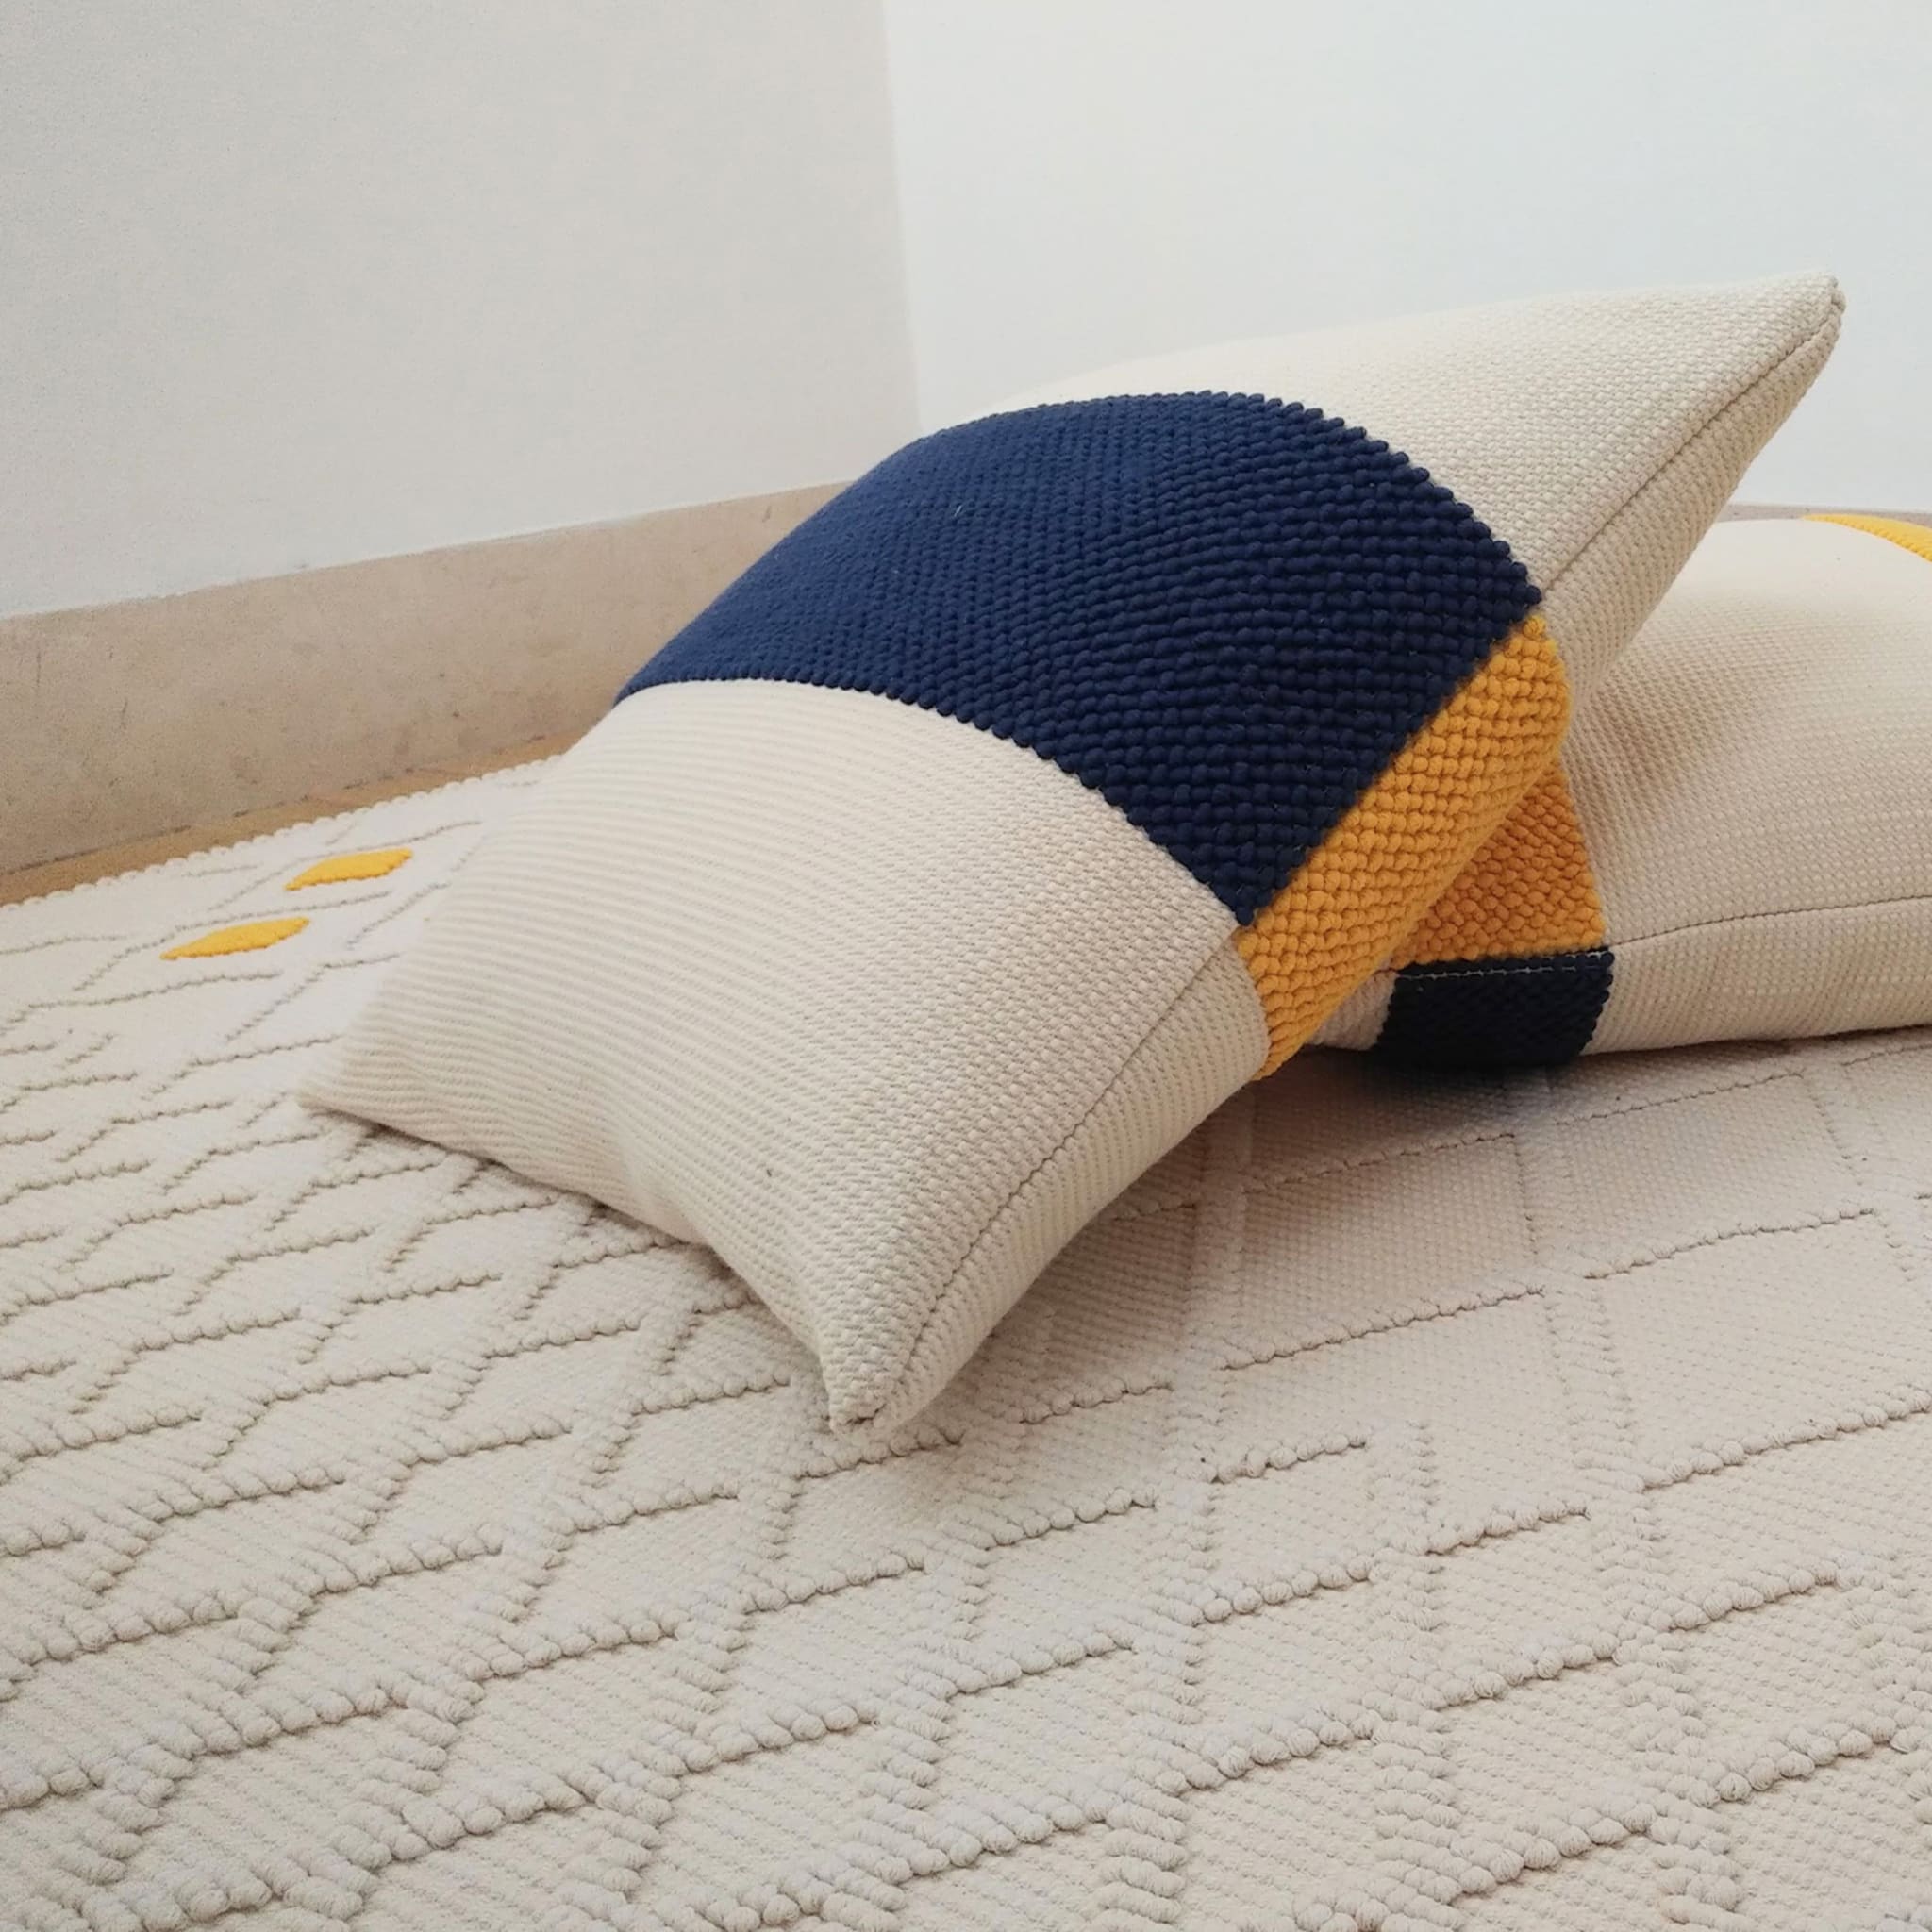 Ecru, Yellow, and Blue Double-Sided Cushion - Alternative view 2